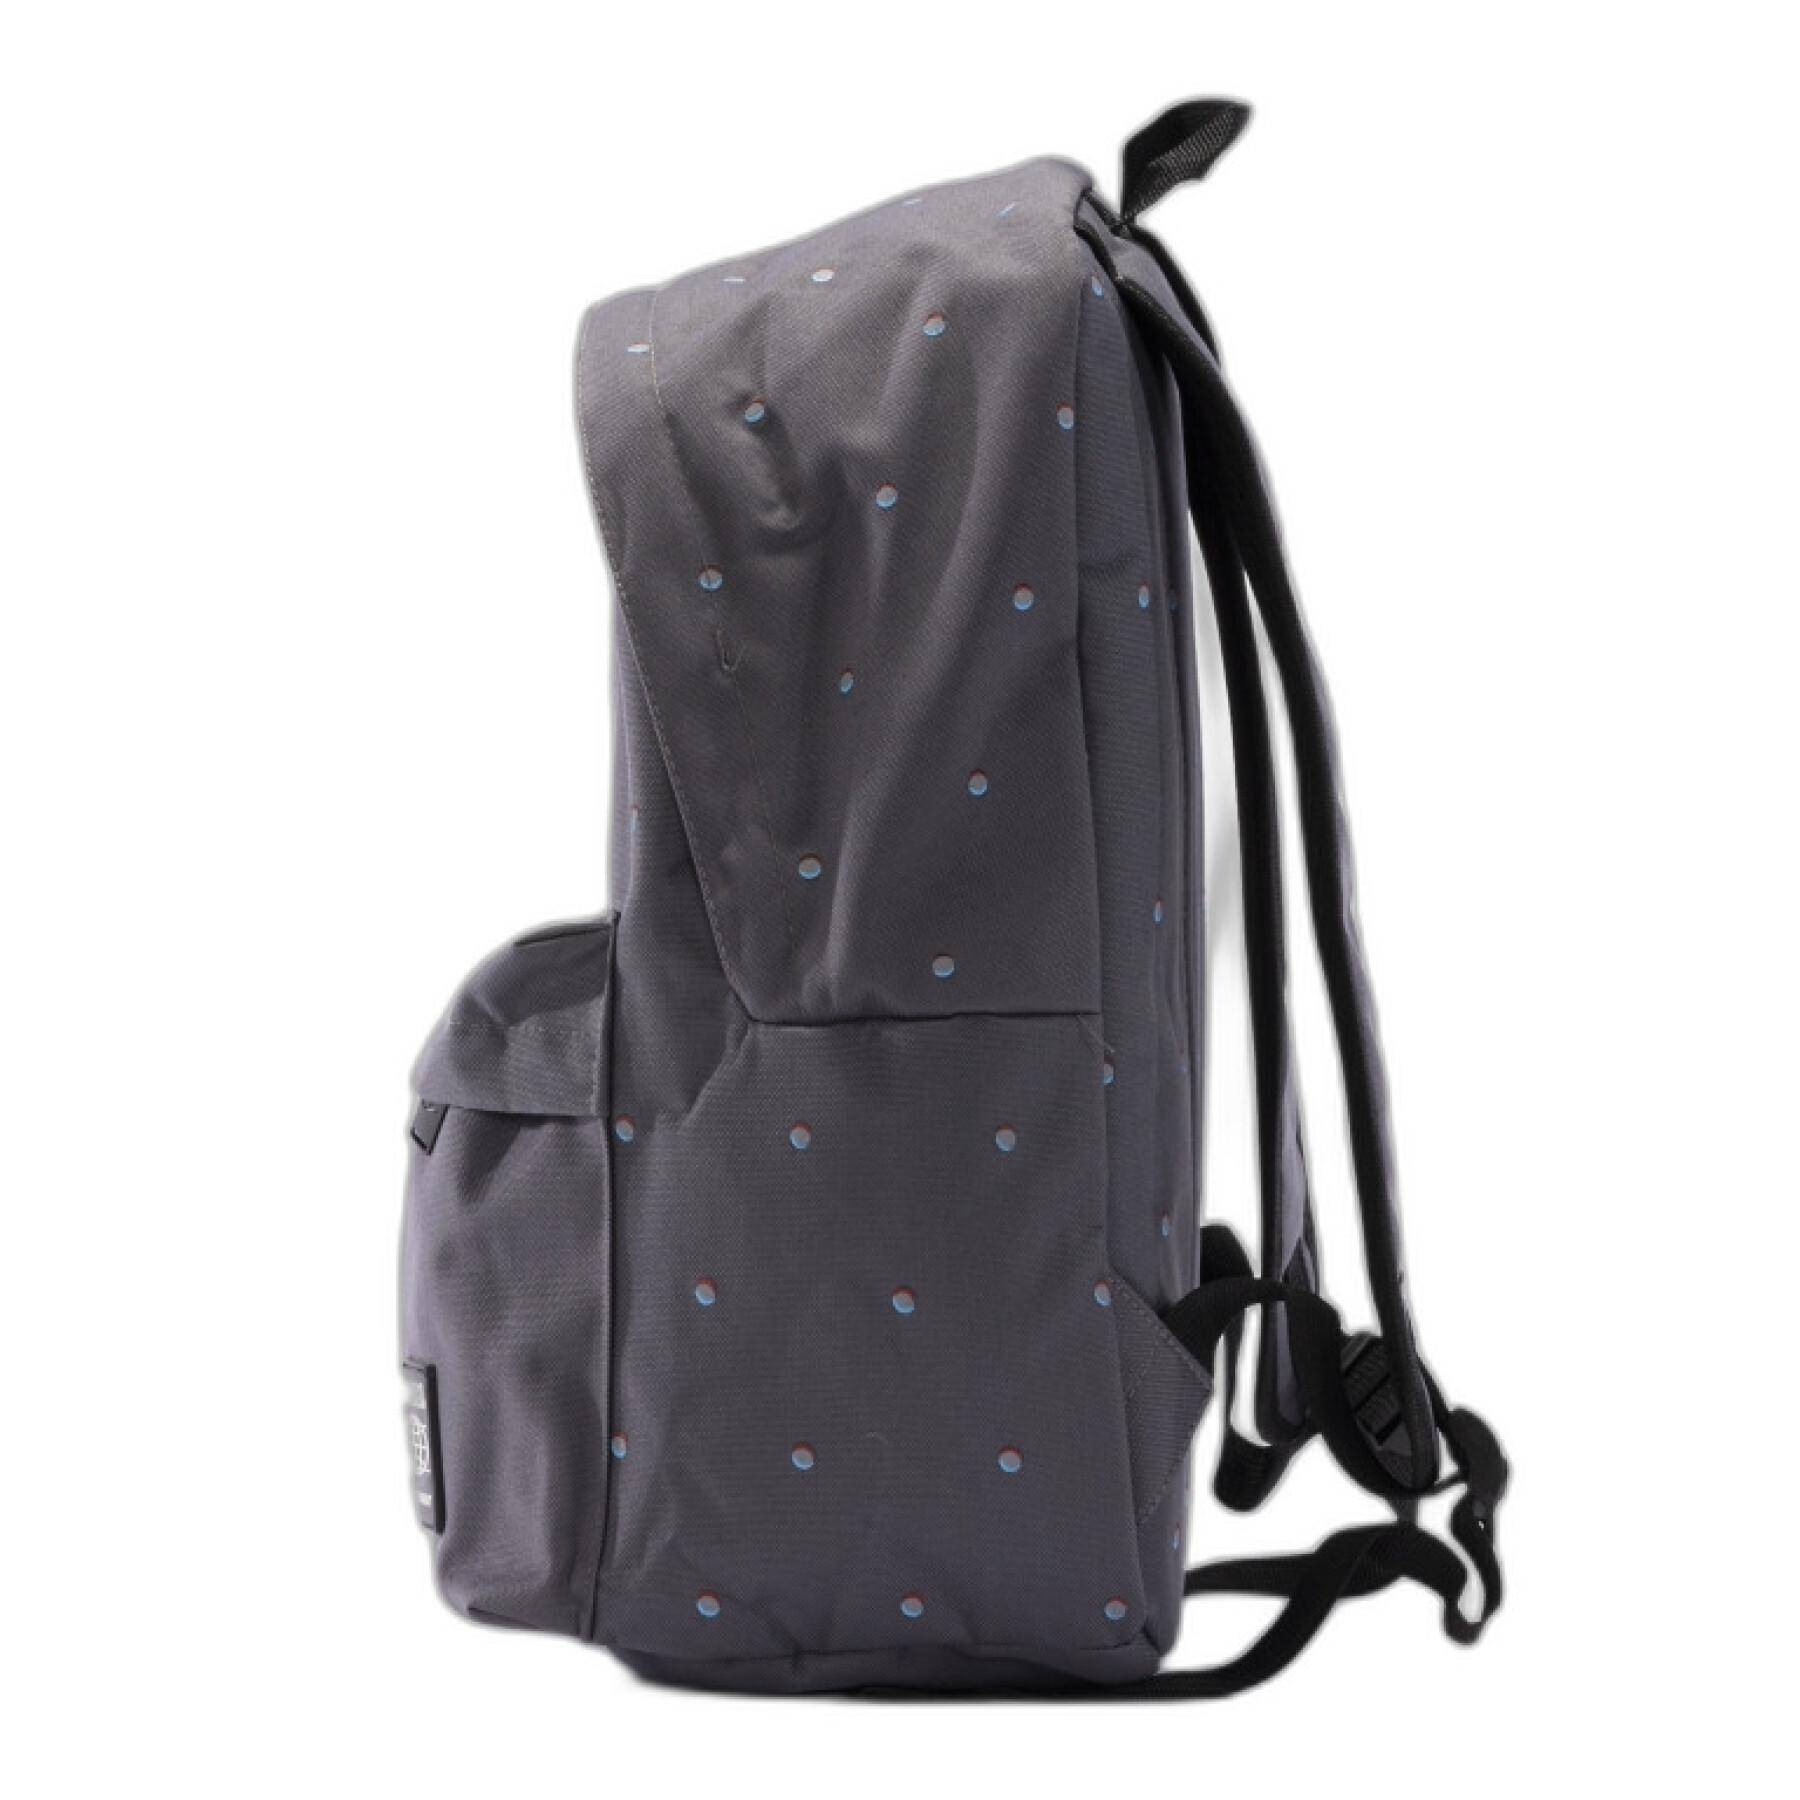 Backpack Joma Active World